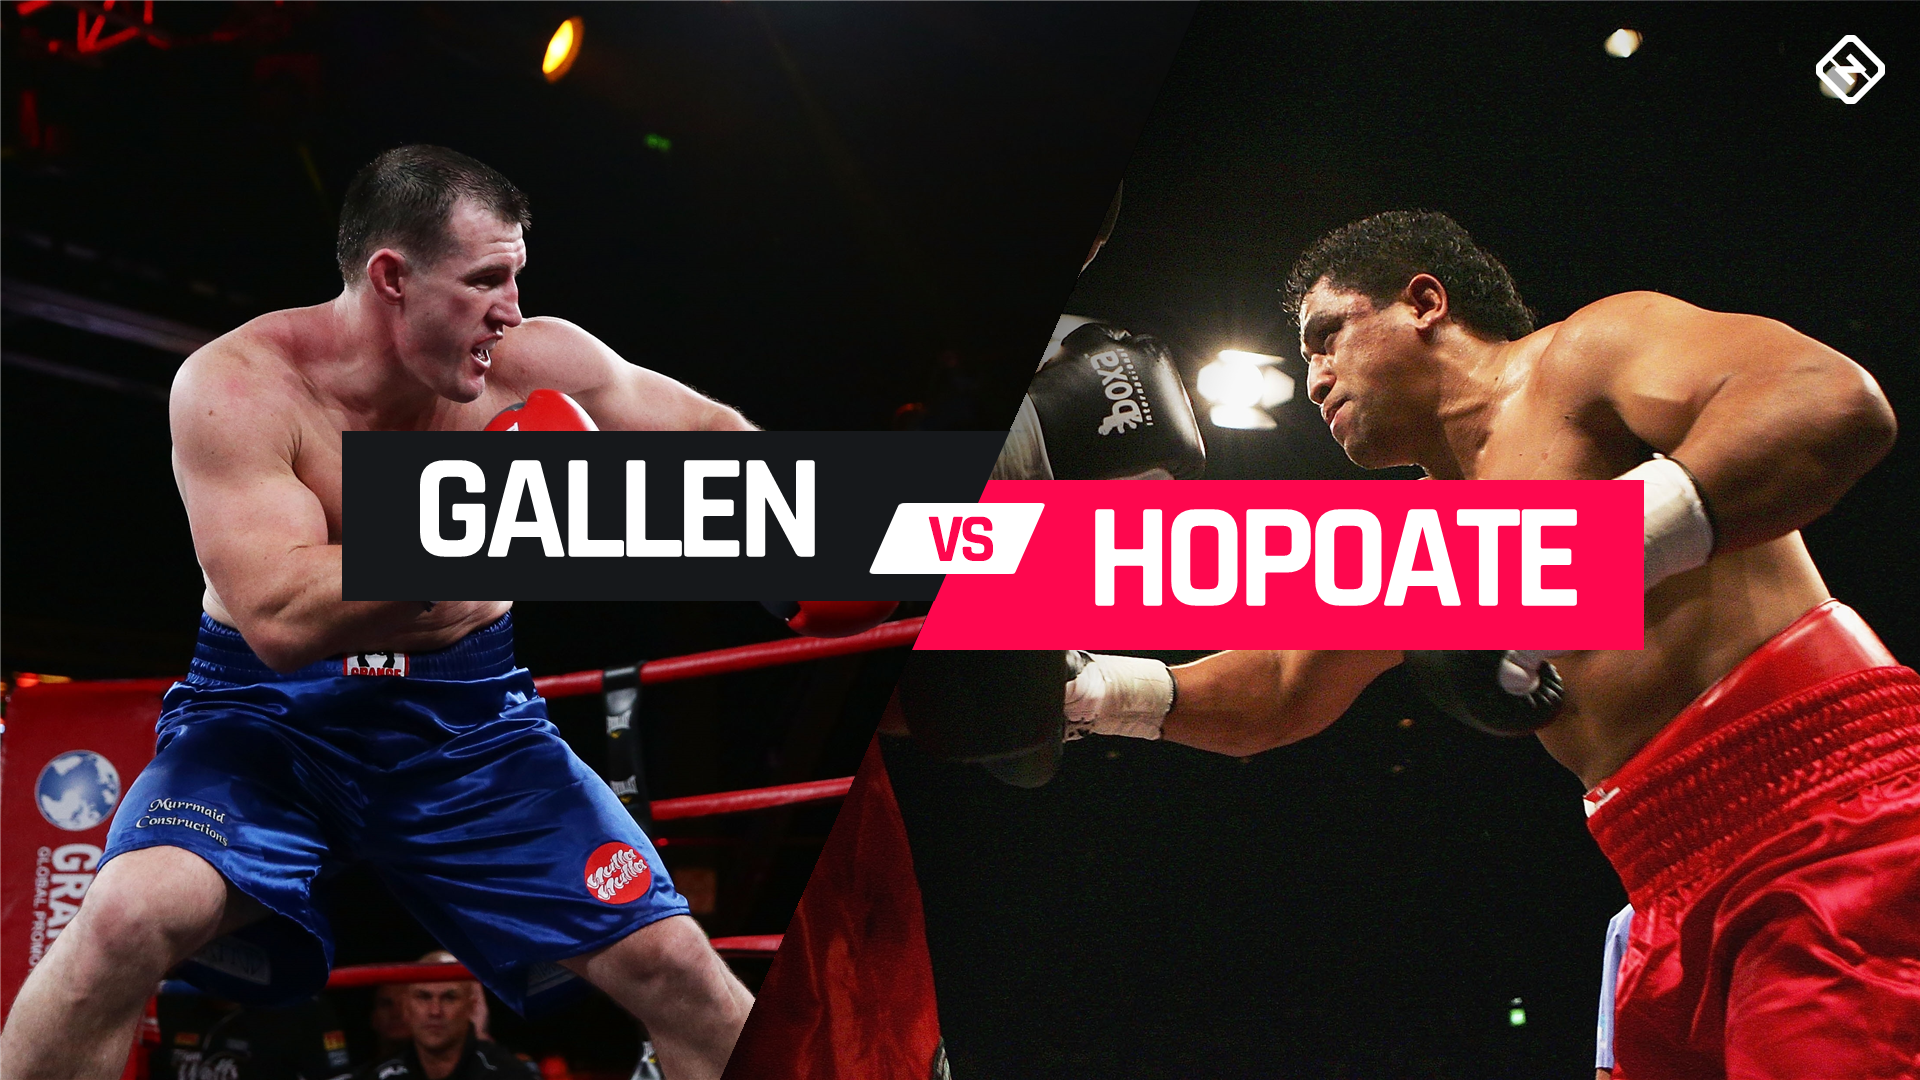 Paul Gallen v John Hopoate: Date, location, tickets, odds and how to watch | Sporting News1920 x 1080